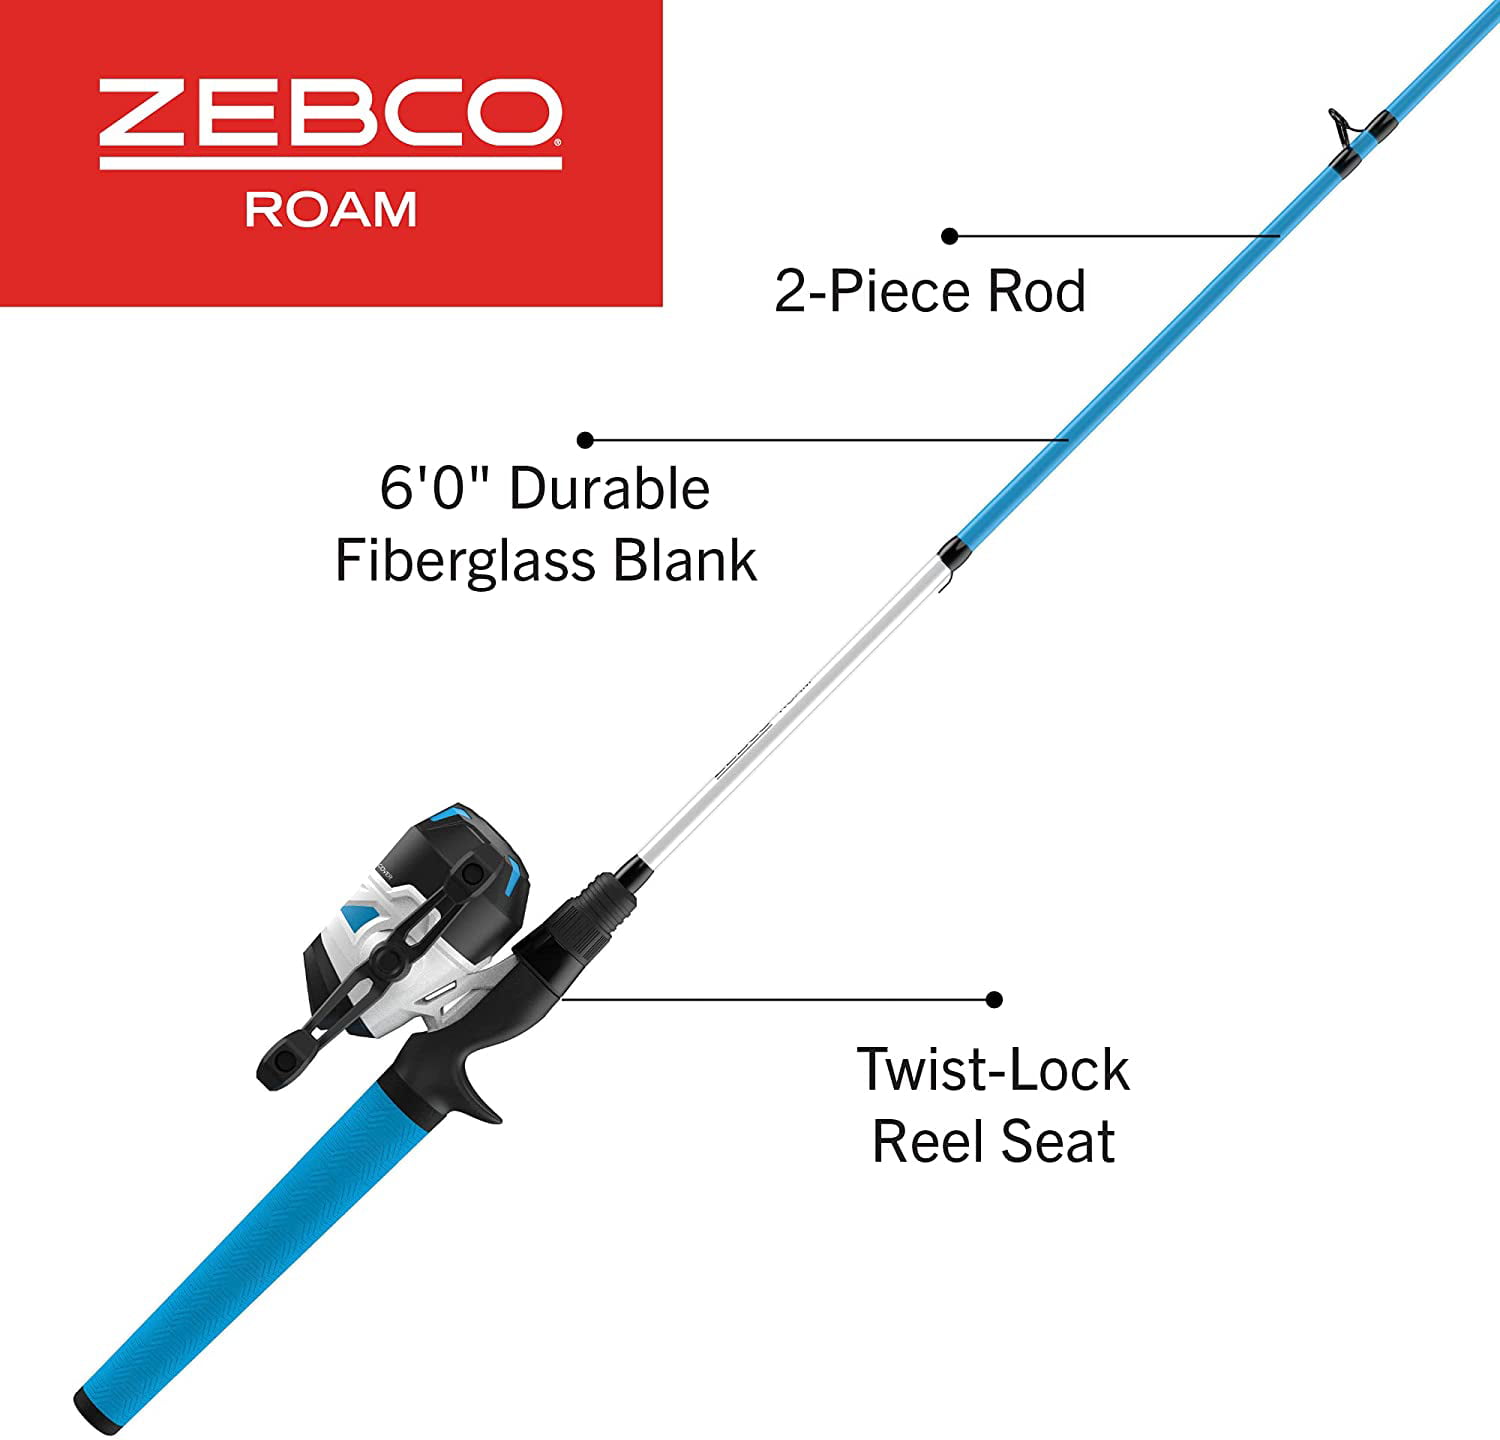 Zebco Roam Spincast Reel and Fishing Rod Combo, 6-Foot 2-Piece Fiberglass  Fishing Pole with ComfortGrip Handle, QuickSet Anti-Reverse Fishing Reel,  Pre-Spooled with 10-Pound Zebco Line, Green 